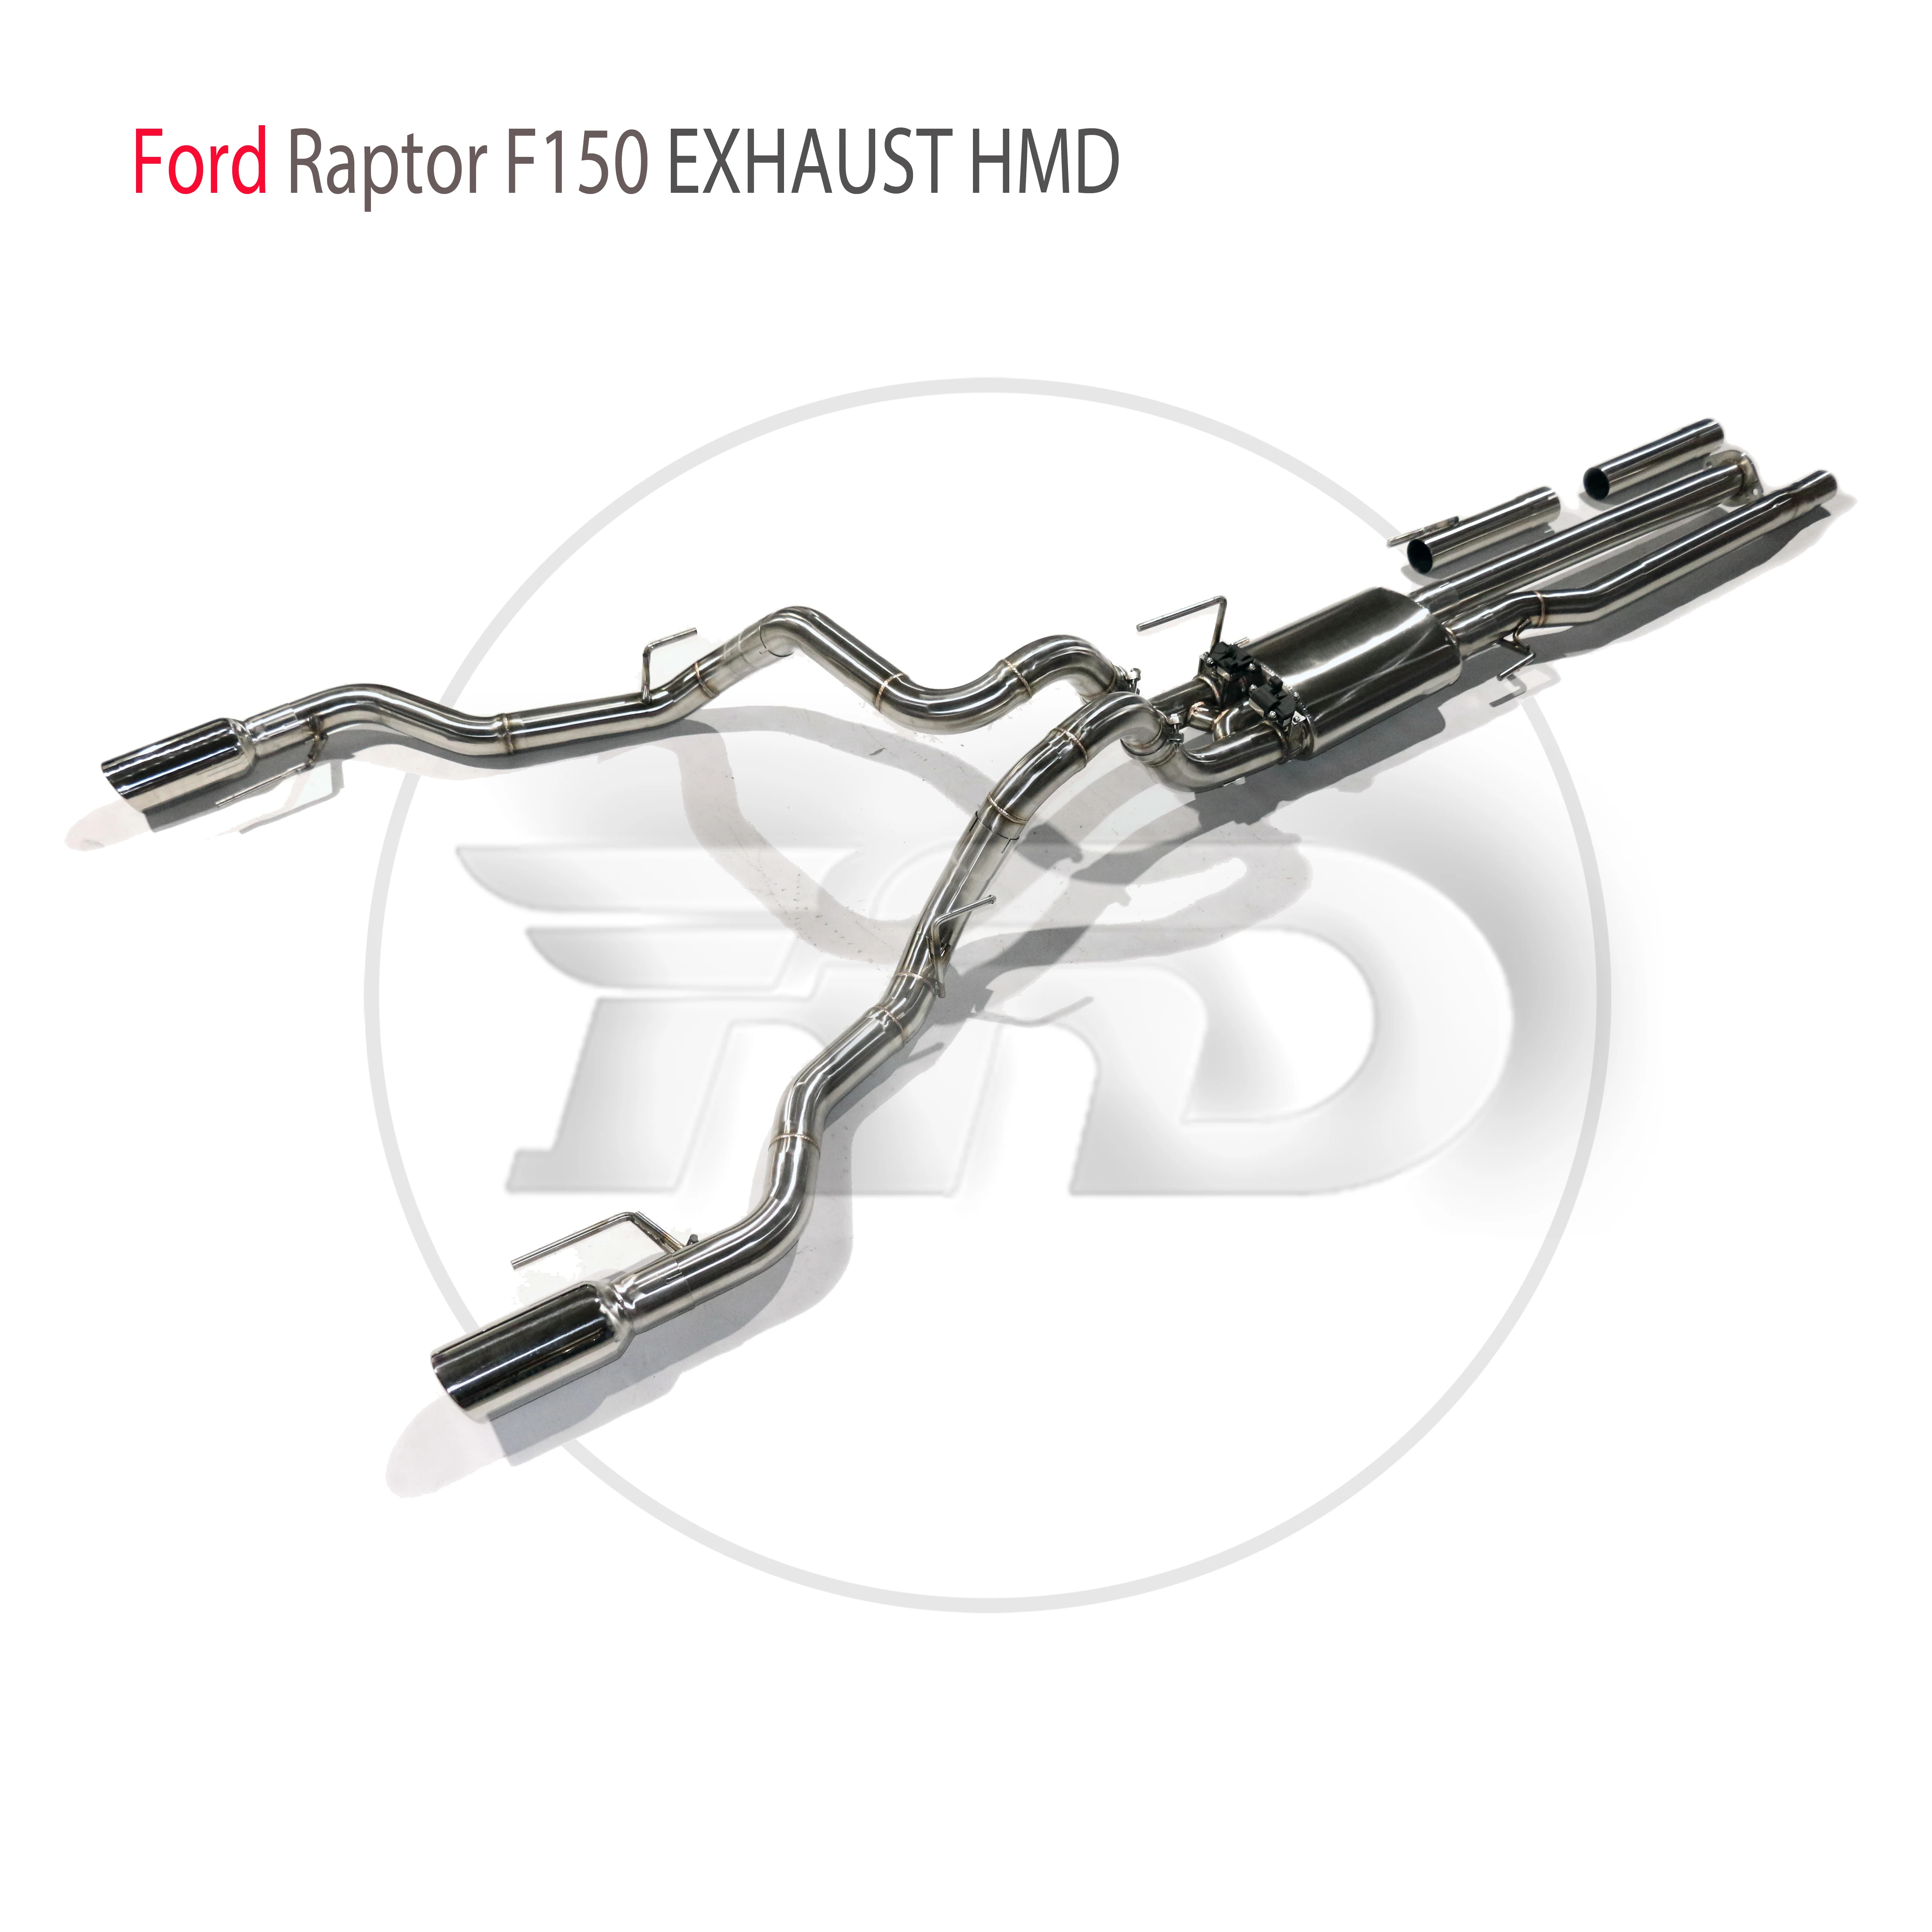 

HMD Stainless Steel Exhaust System Performance Catback for Ford Raptor F150 3.5TT Auto Replacement Modification Electronic Valve